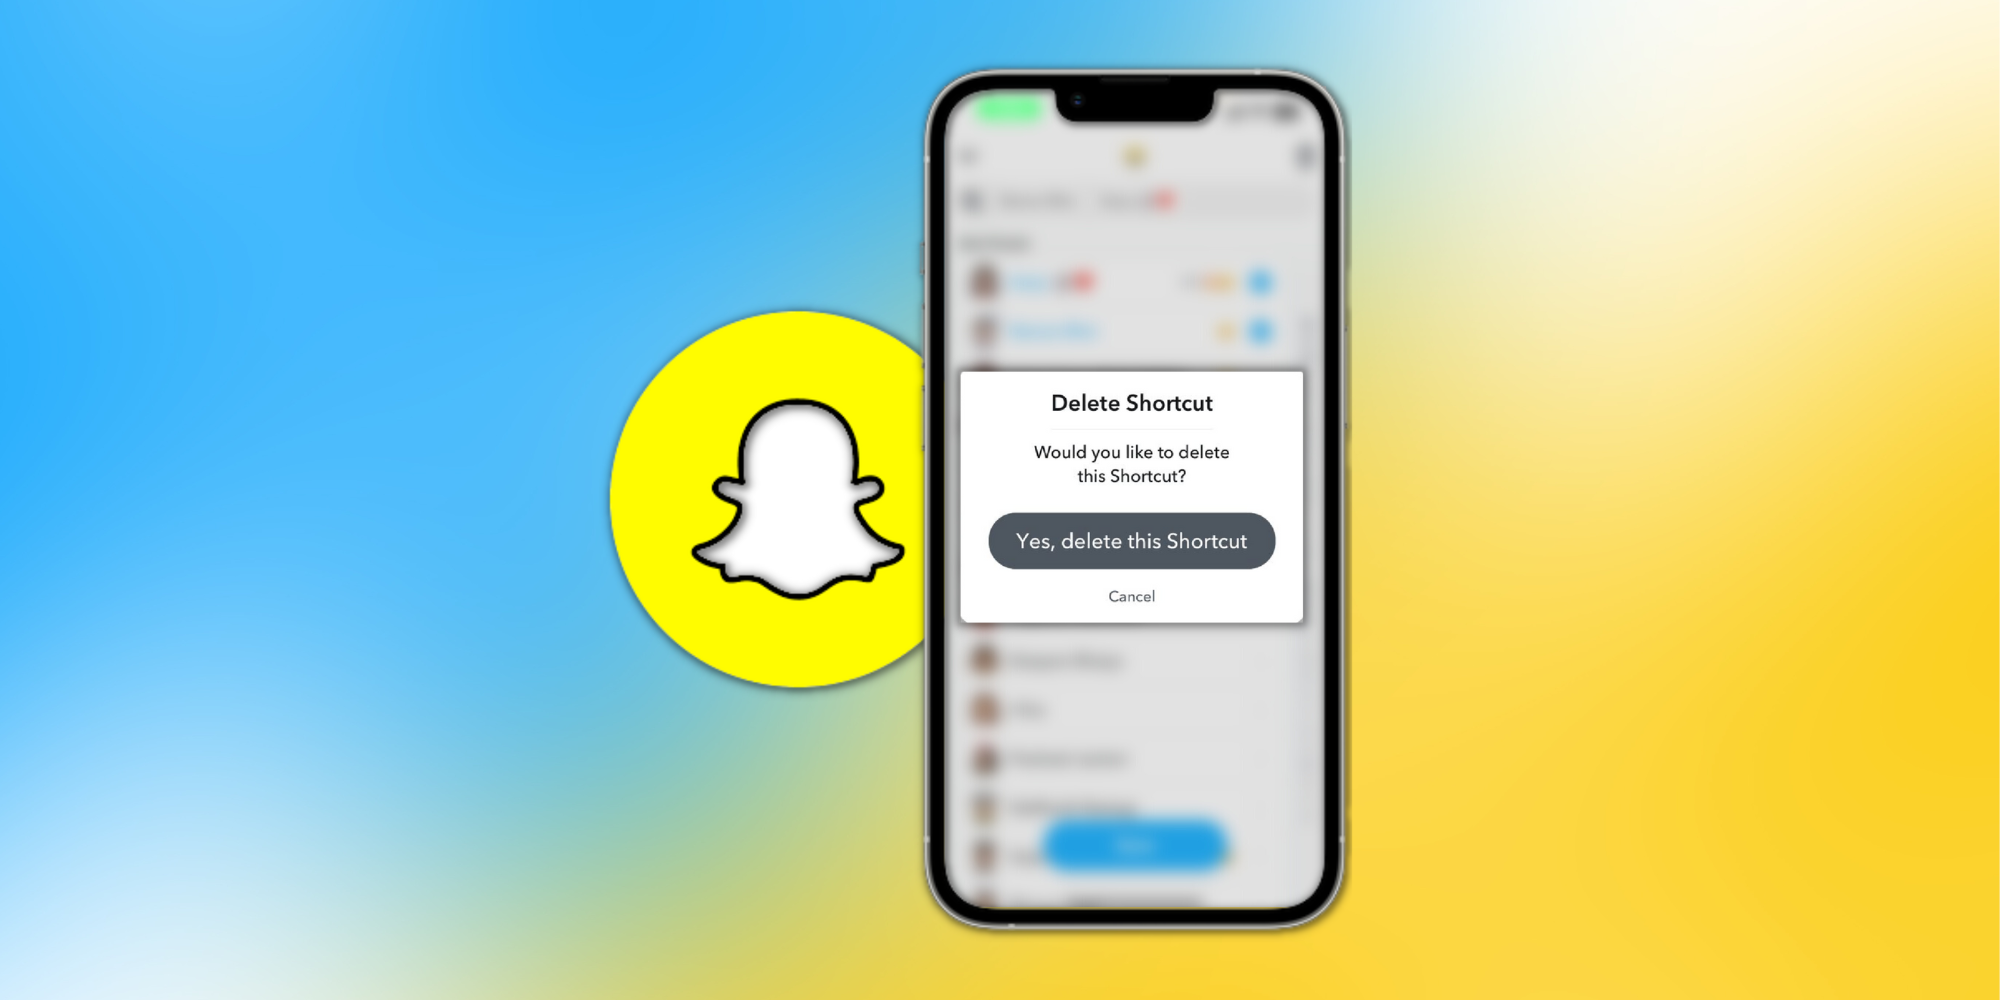 How To Delete Shortcut On Snapchat